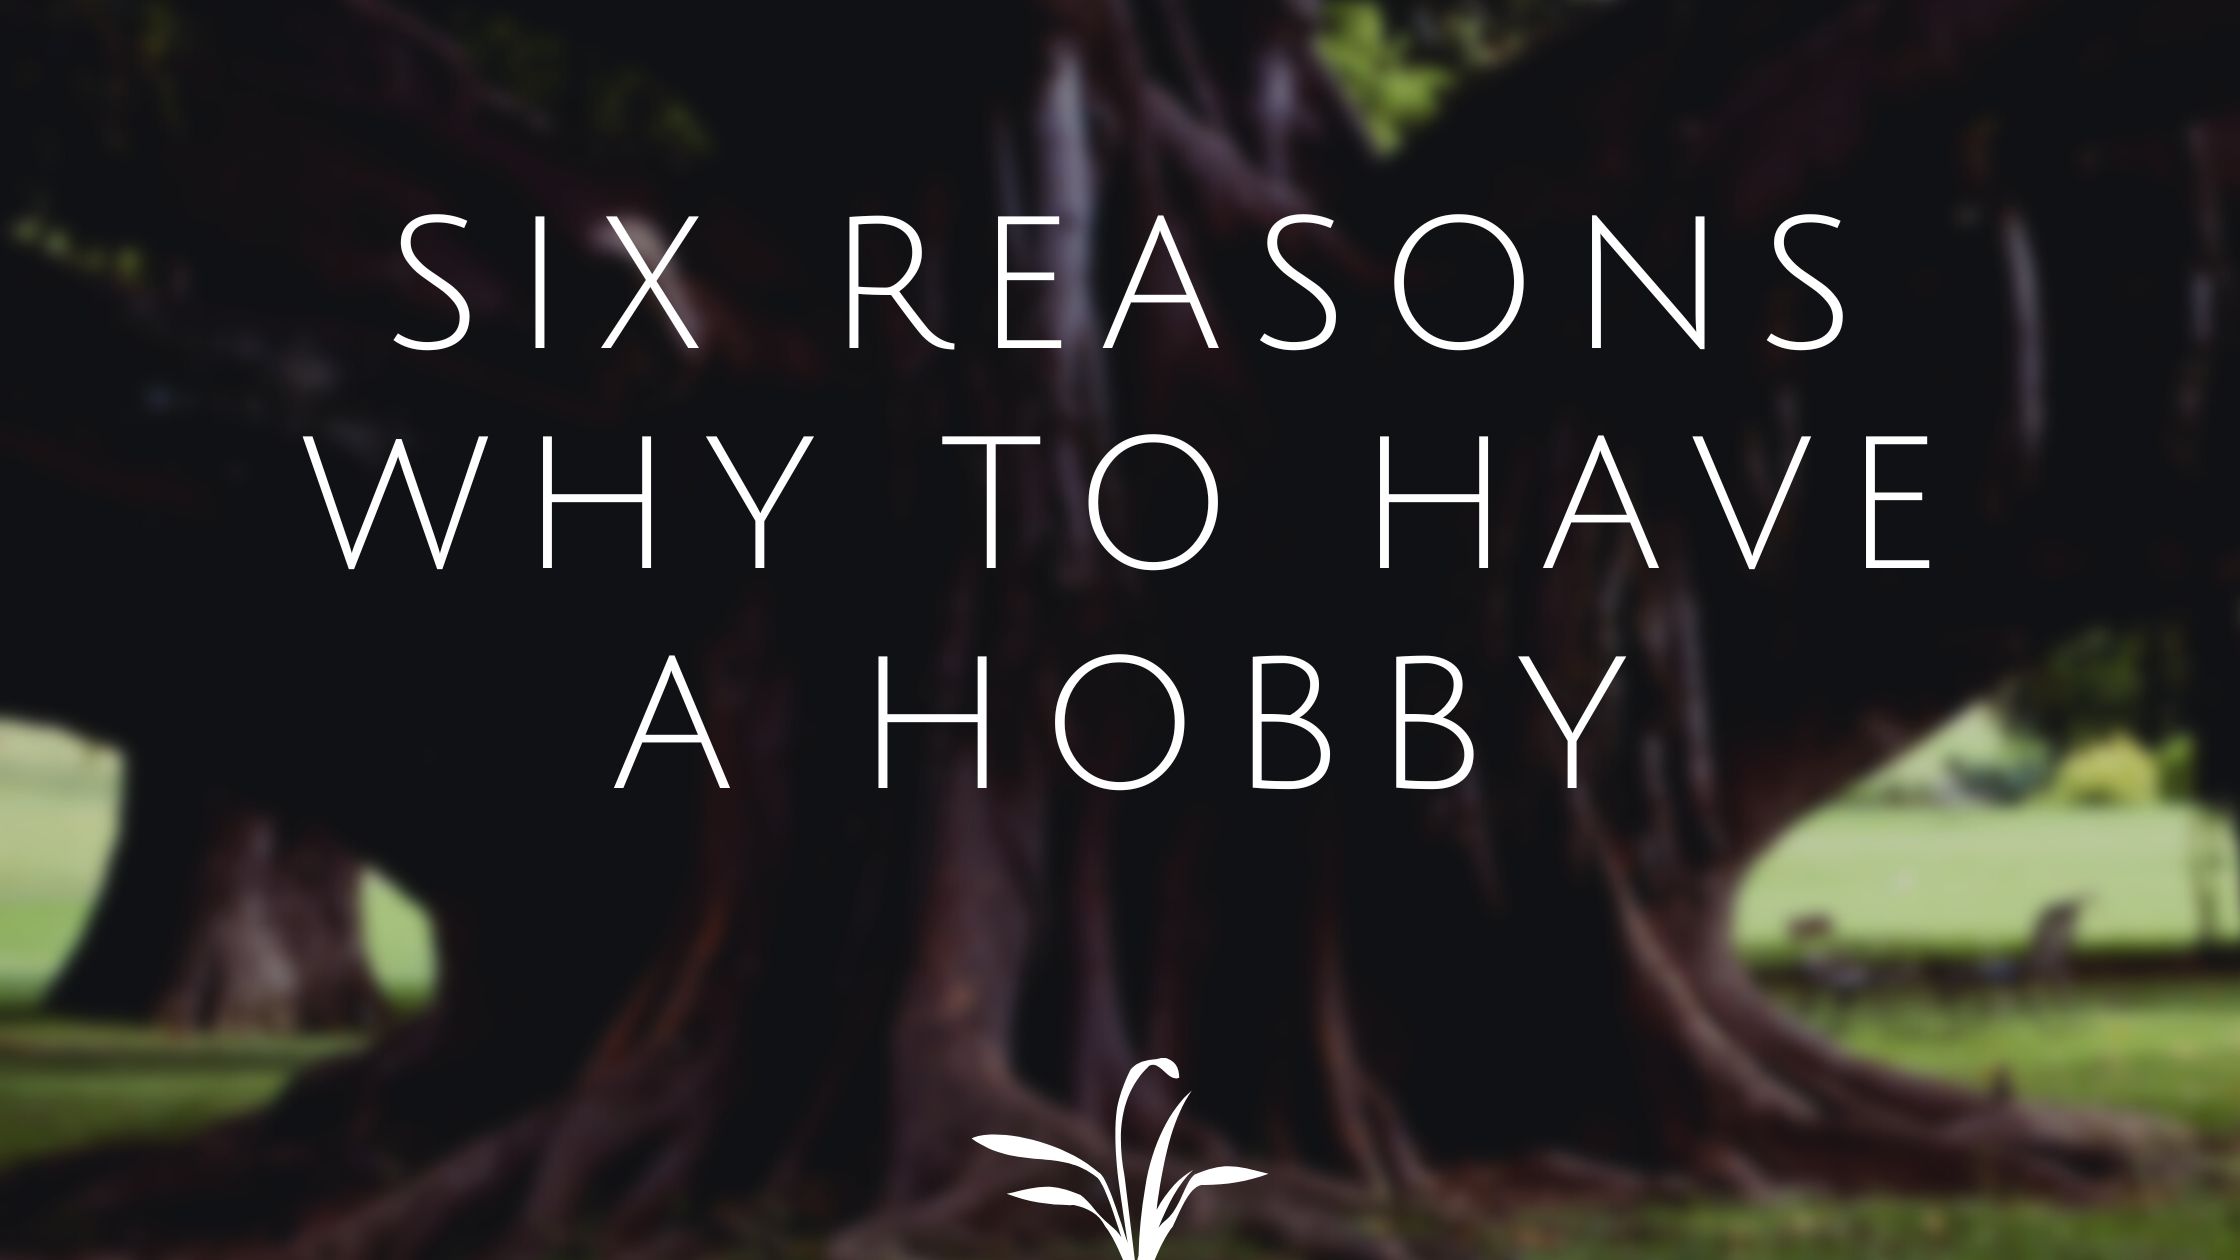 Six reasons why one must have a hobby